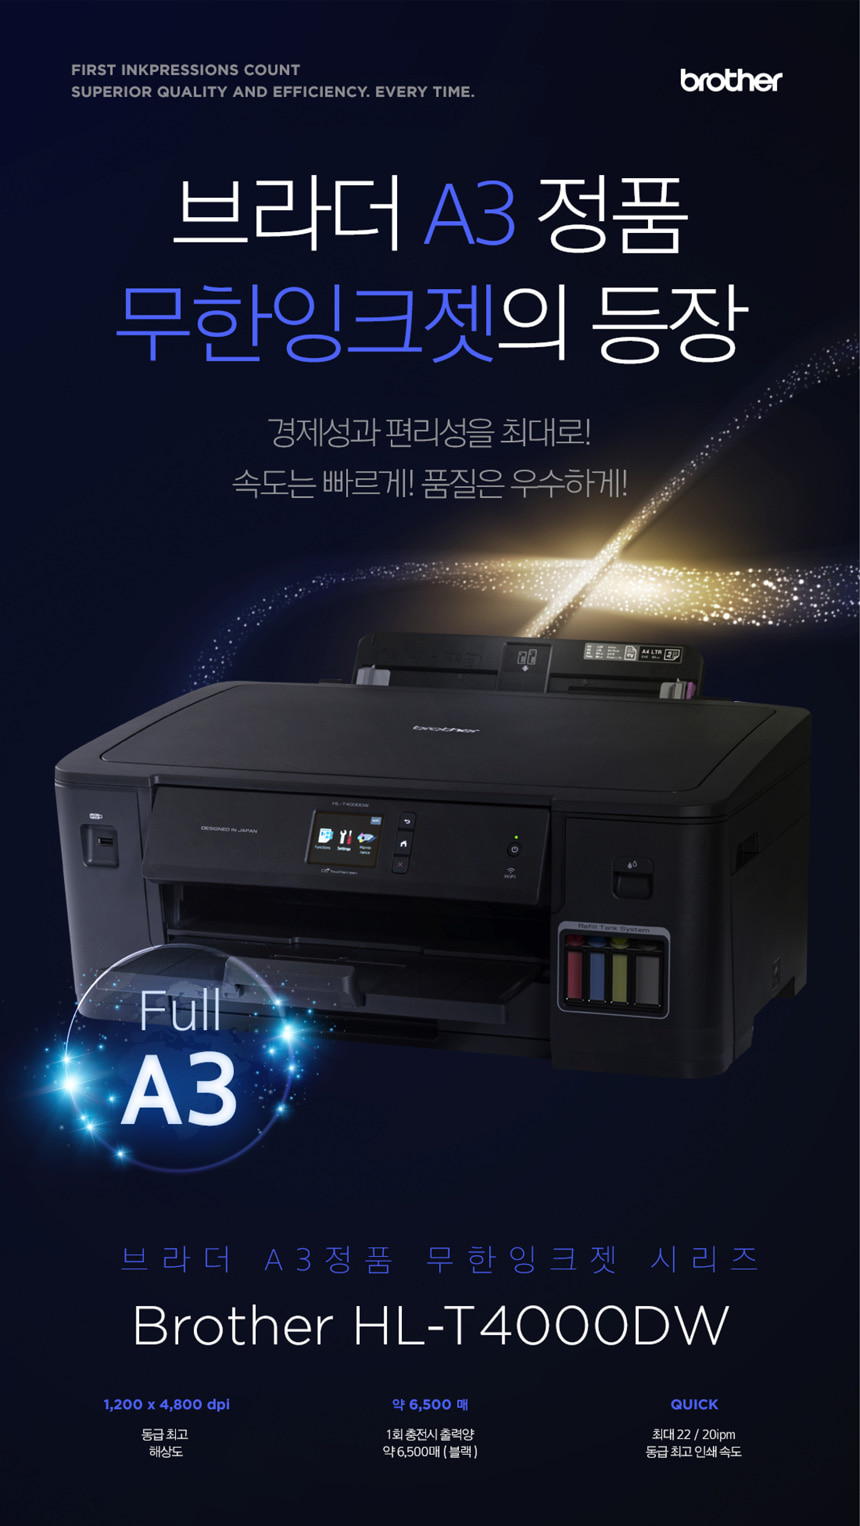 brother-HL-T4000DW